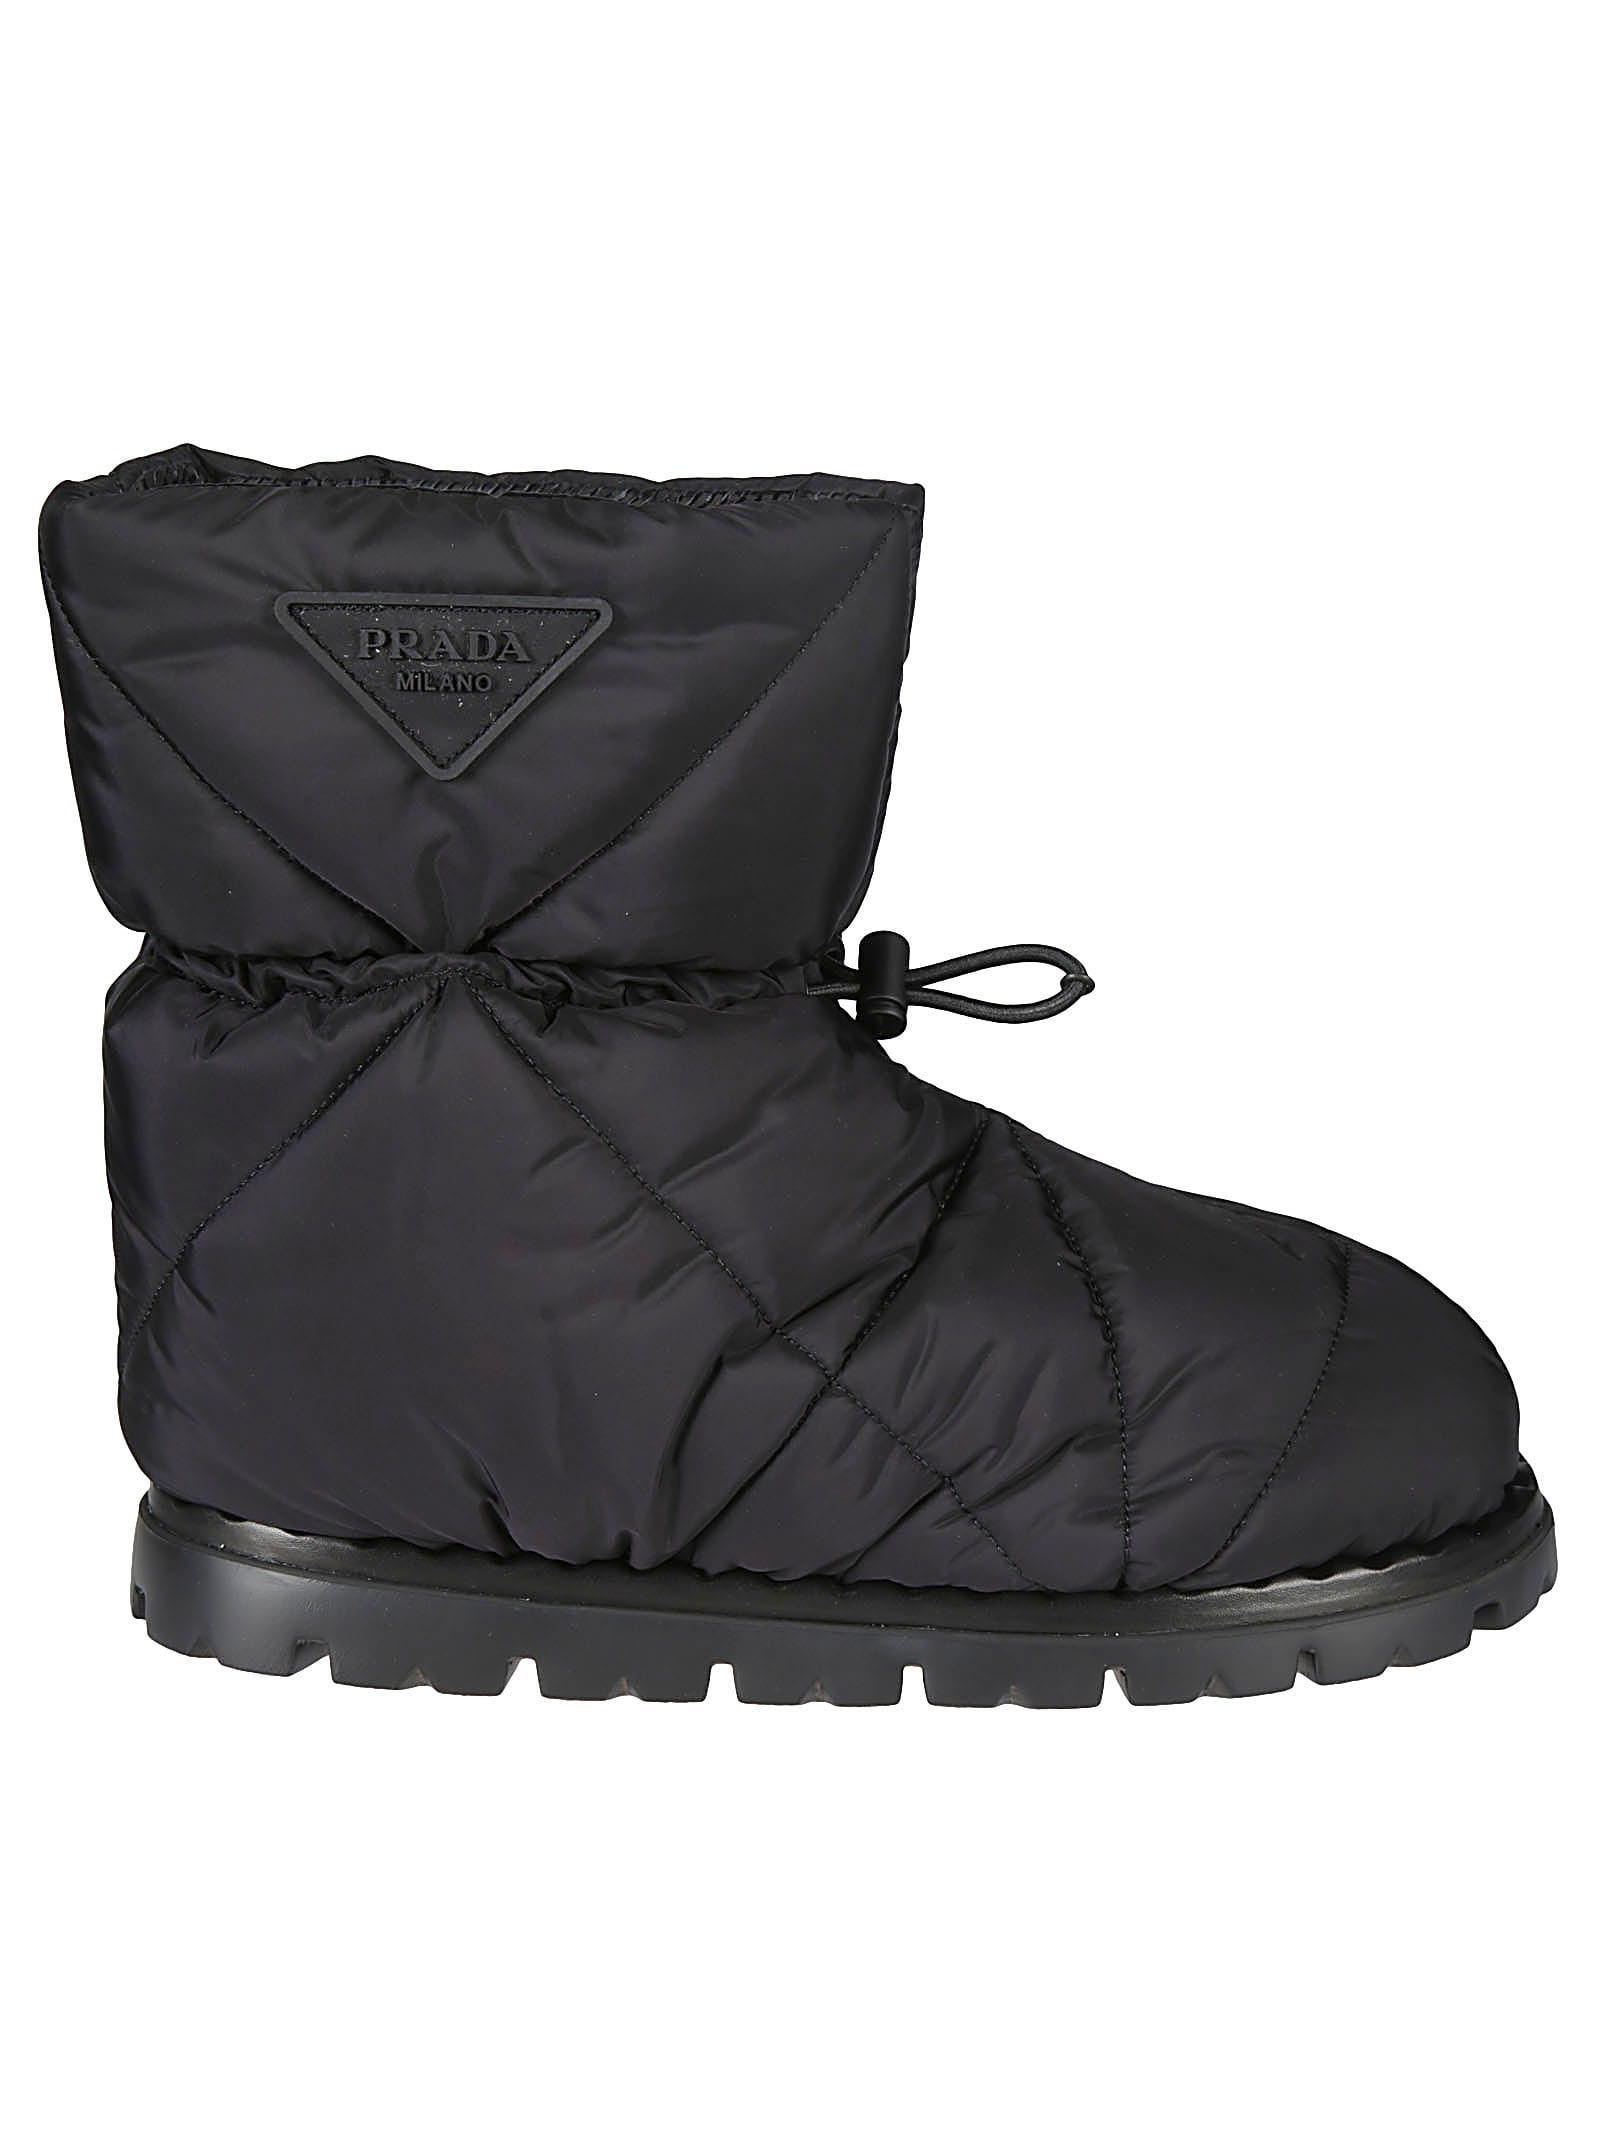 Buy Prada Drawstring Quilted Ankle Boots online, shop Prada shoes with free shipping